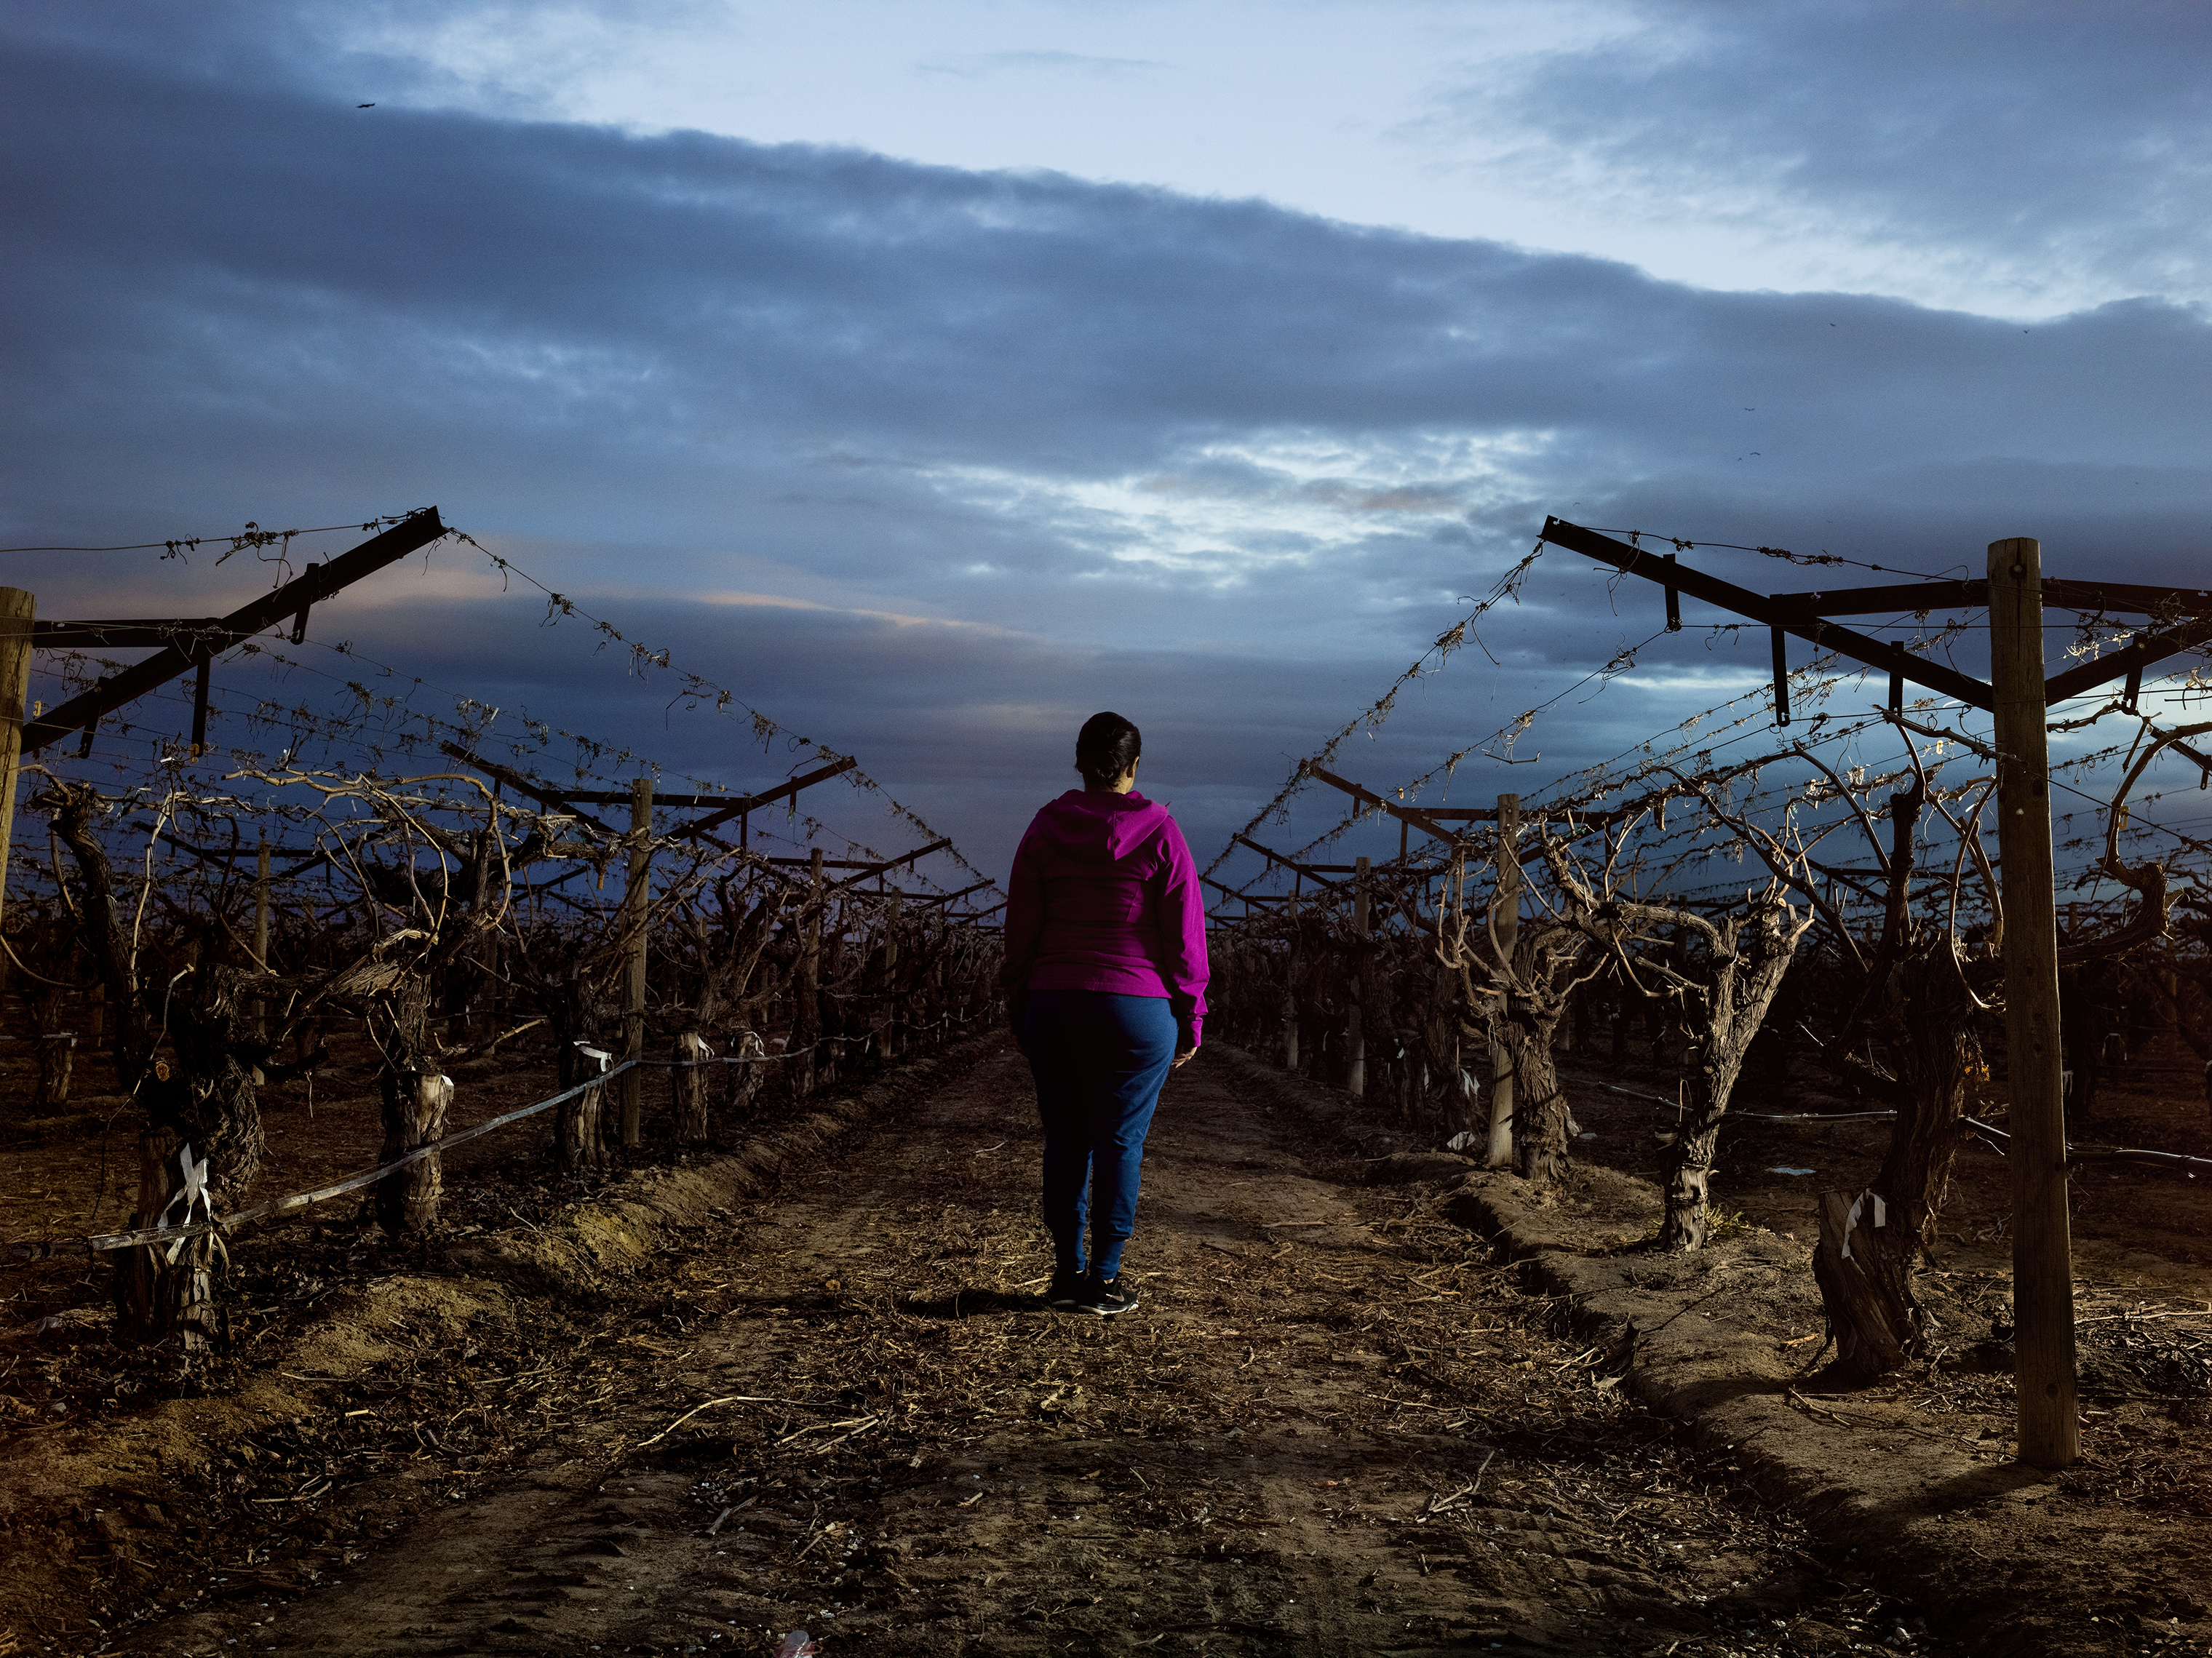 After her husband was deported, Maria, an undocumented farmworker, was left to raise their three daughters on her own. (Michele Asselin for TIME)